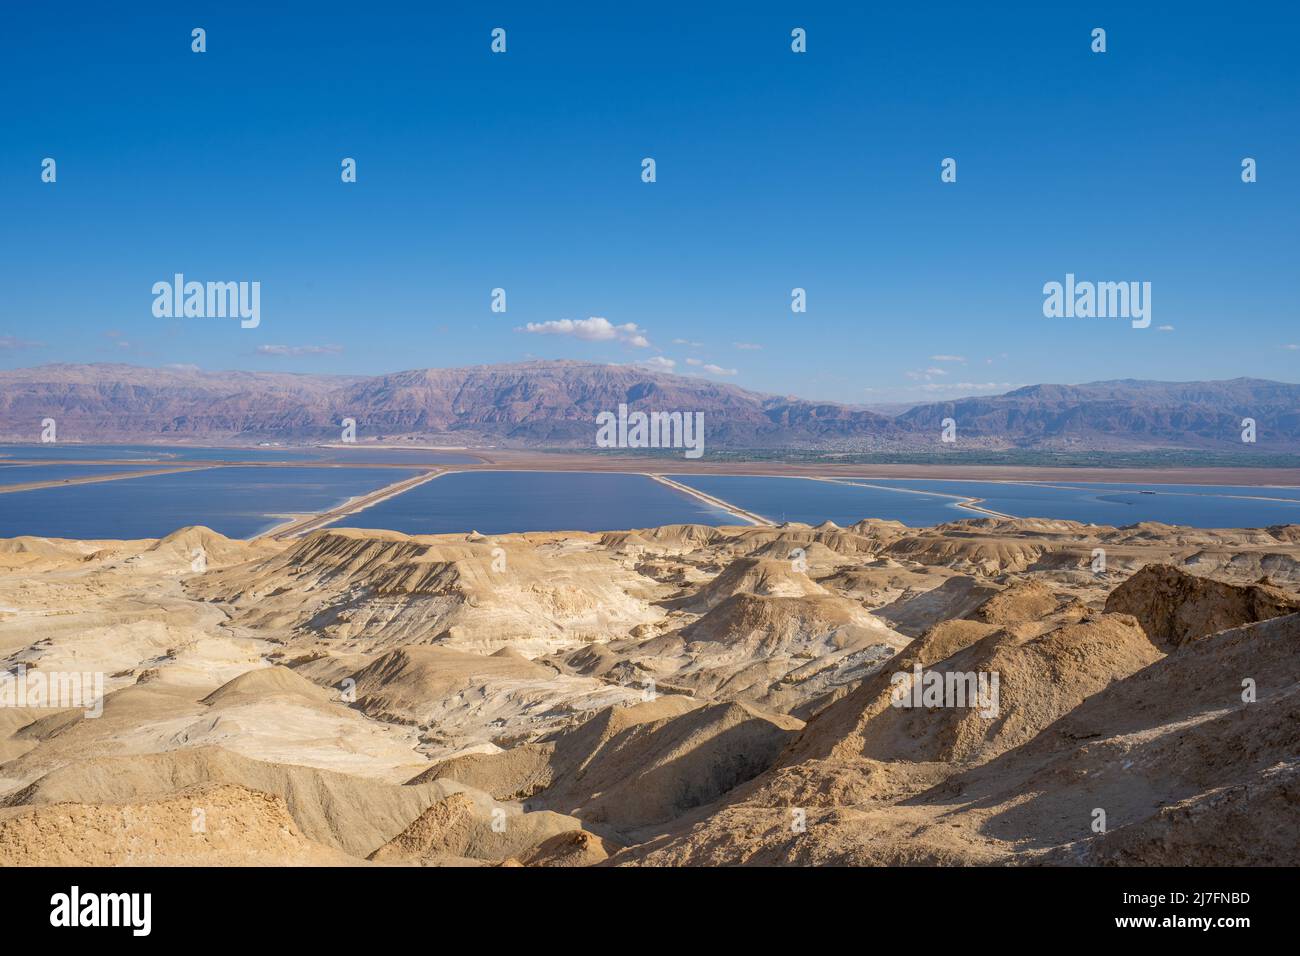 Mount Sodom (Har Sedom) is a hill along the southwestern part of the Dead Sea in Israel; it is part of the Judaean Desert Nature Reserve. It takes its Stock Photo